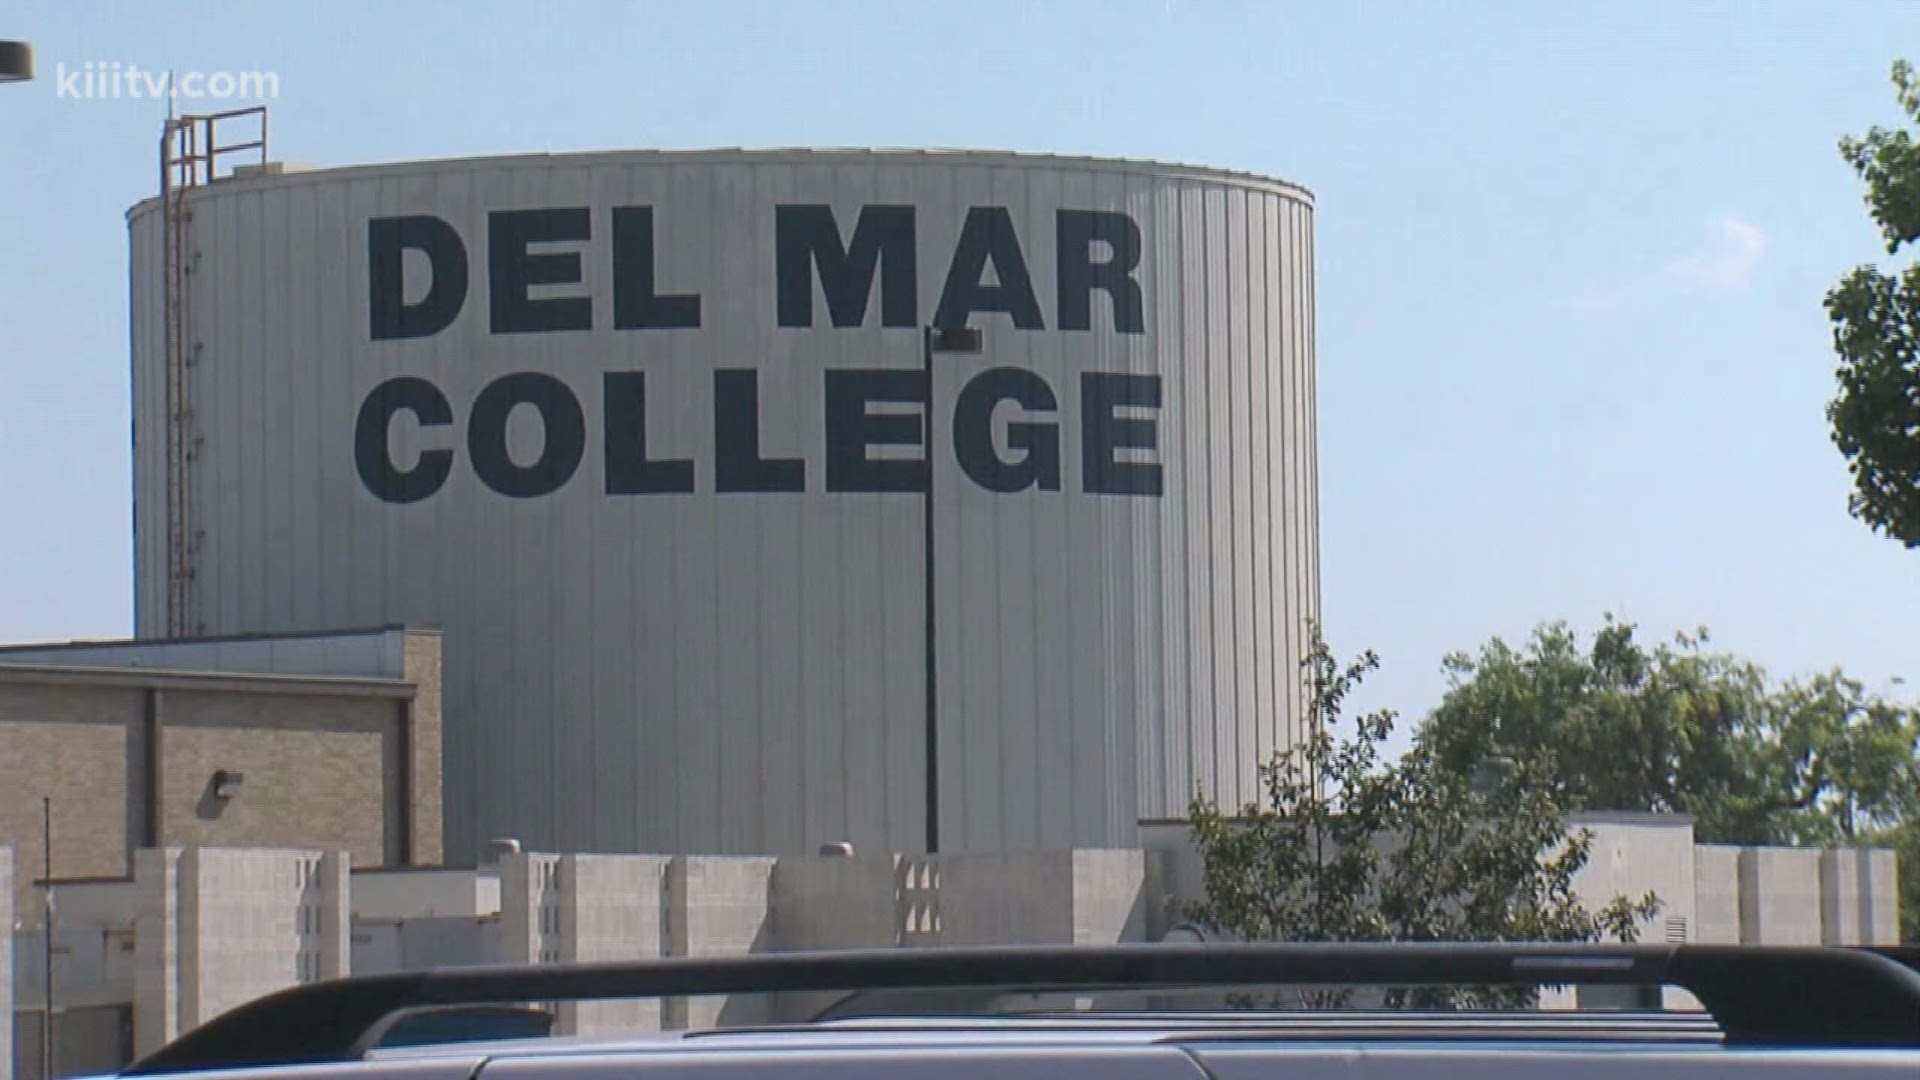 Gulf Coast Growth Ventures continued to invest in the Coastal Bend community Thursday by presenting a $60,000 donation for scholarships to students at Del Mar College.